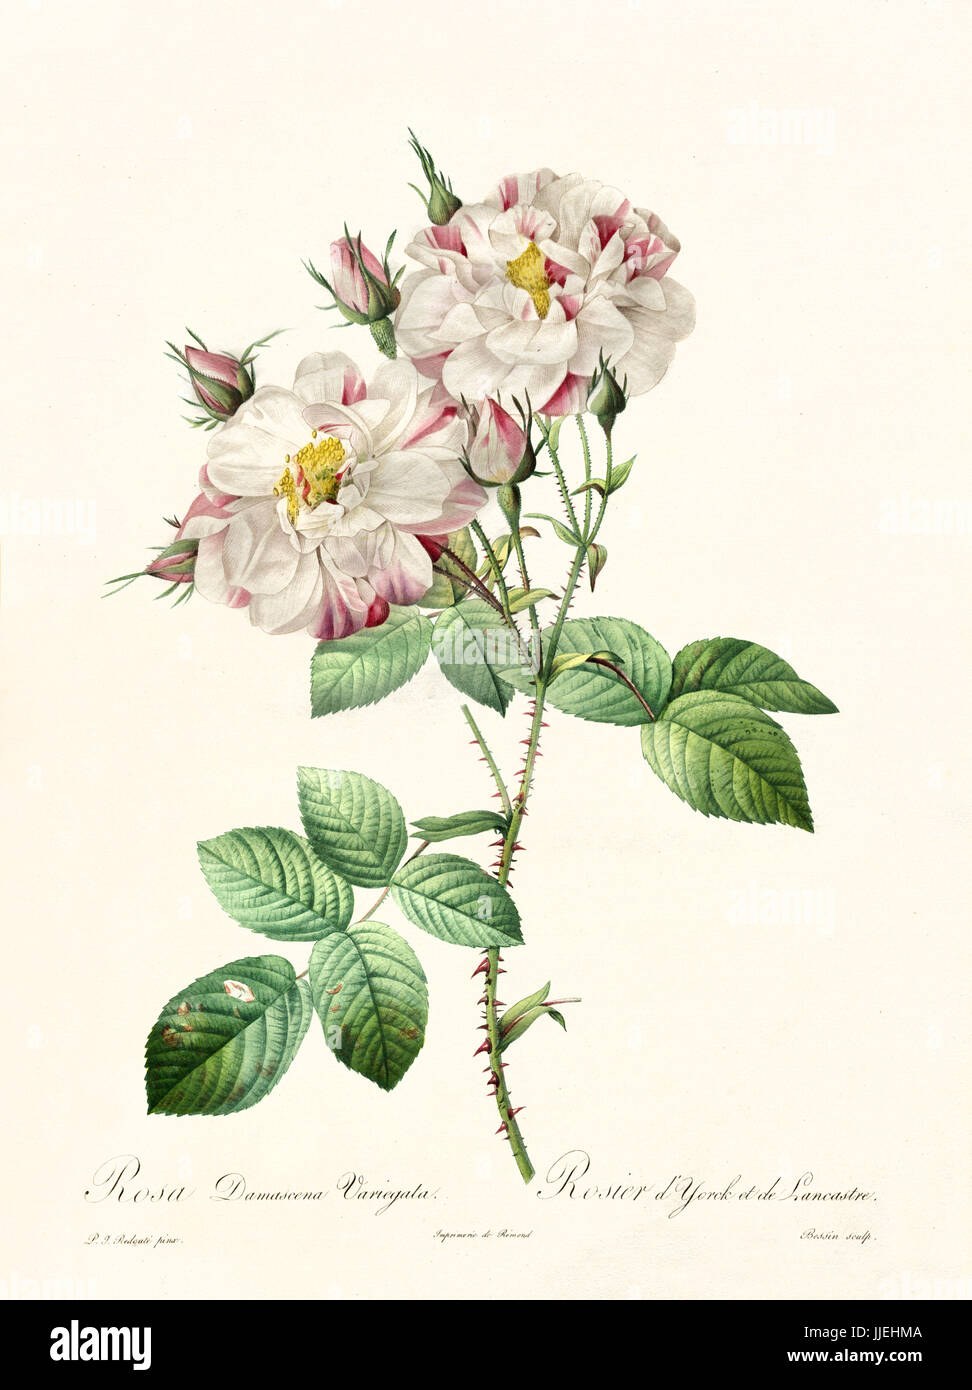 Old illustration of Rosa damascena variegata. Created by P. R. Redoute, published on Les Roses, Imp. Firmin Didot, Paris, 1817-24 Stock Photo